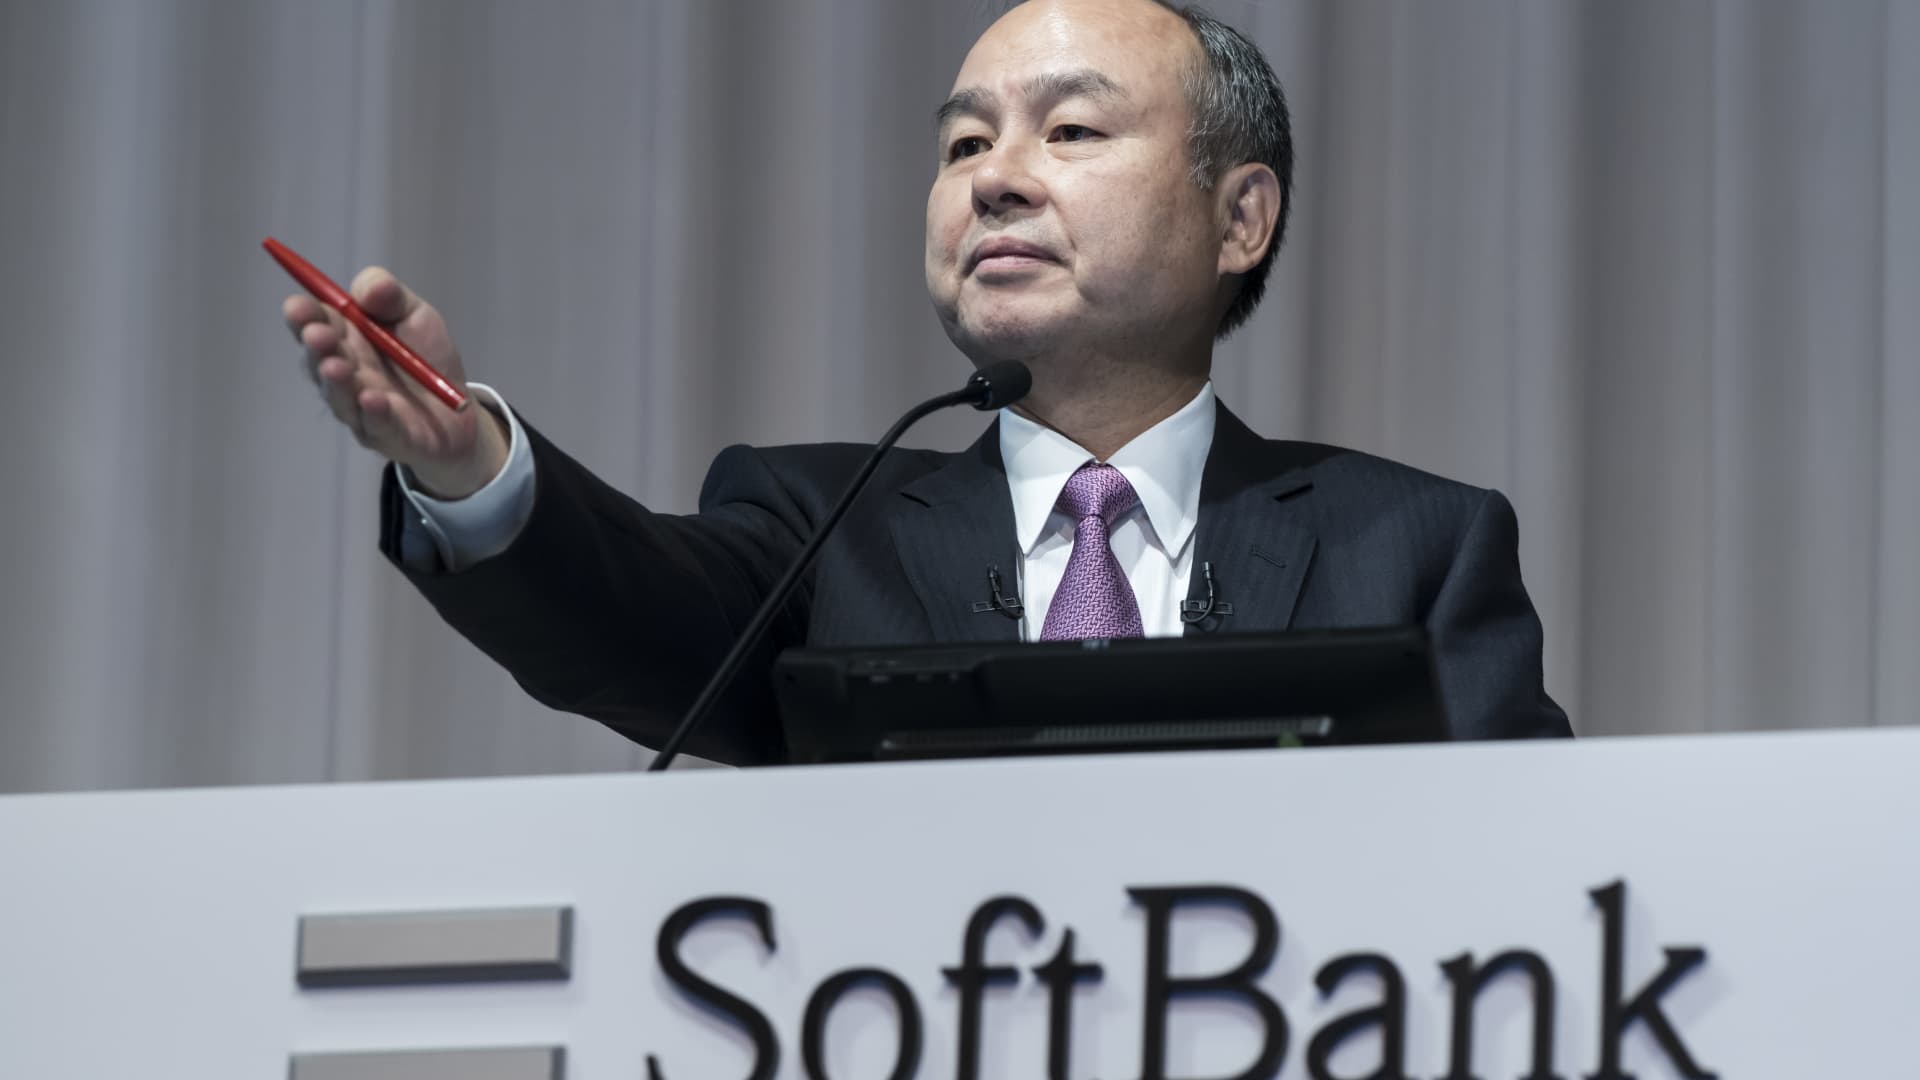 Softbank sues social media startup it invested in, alleging it faked user numbers